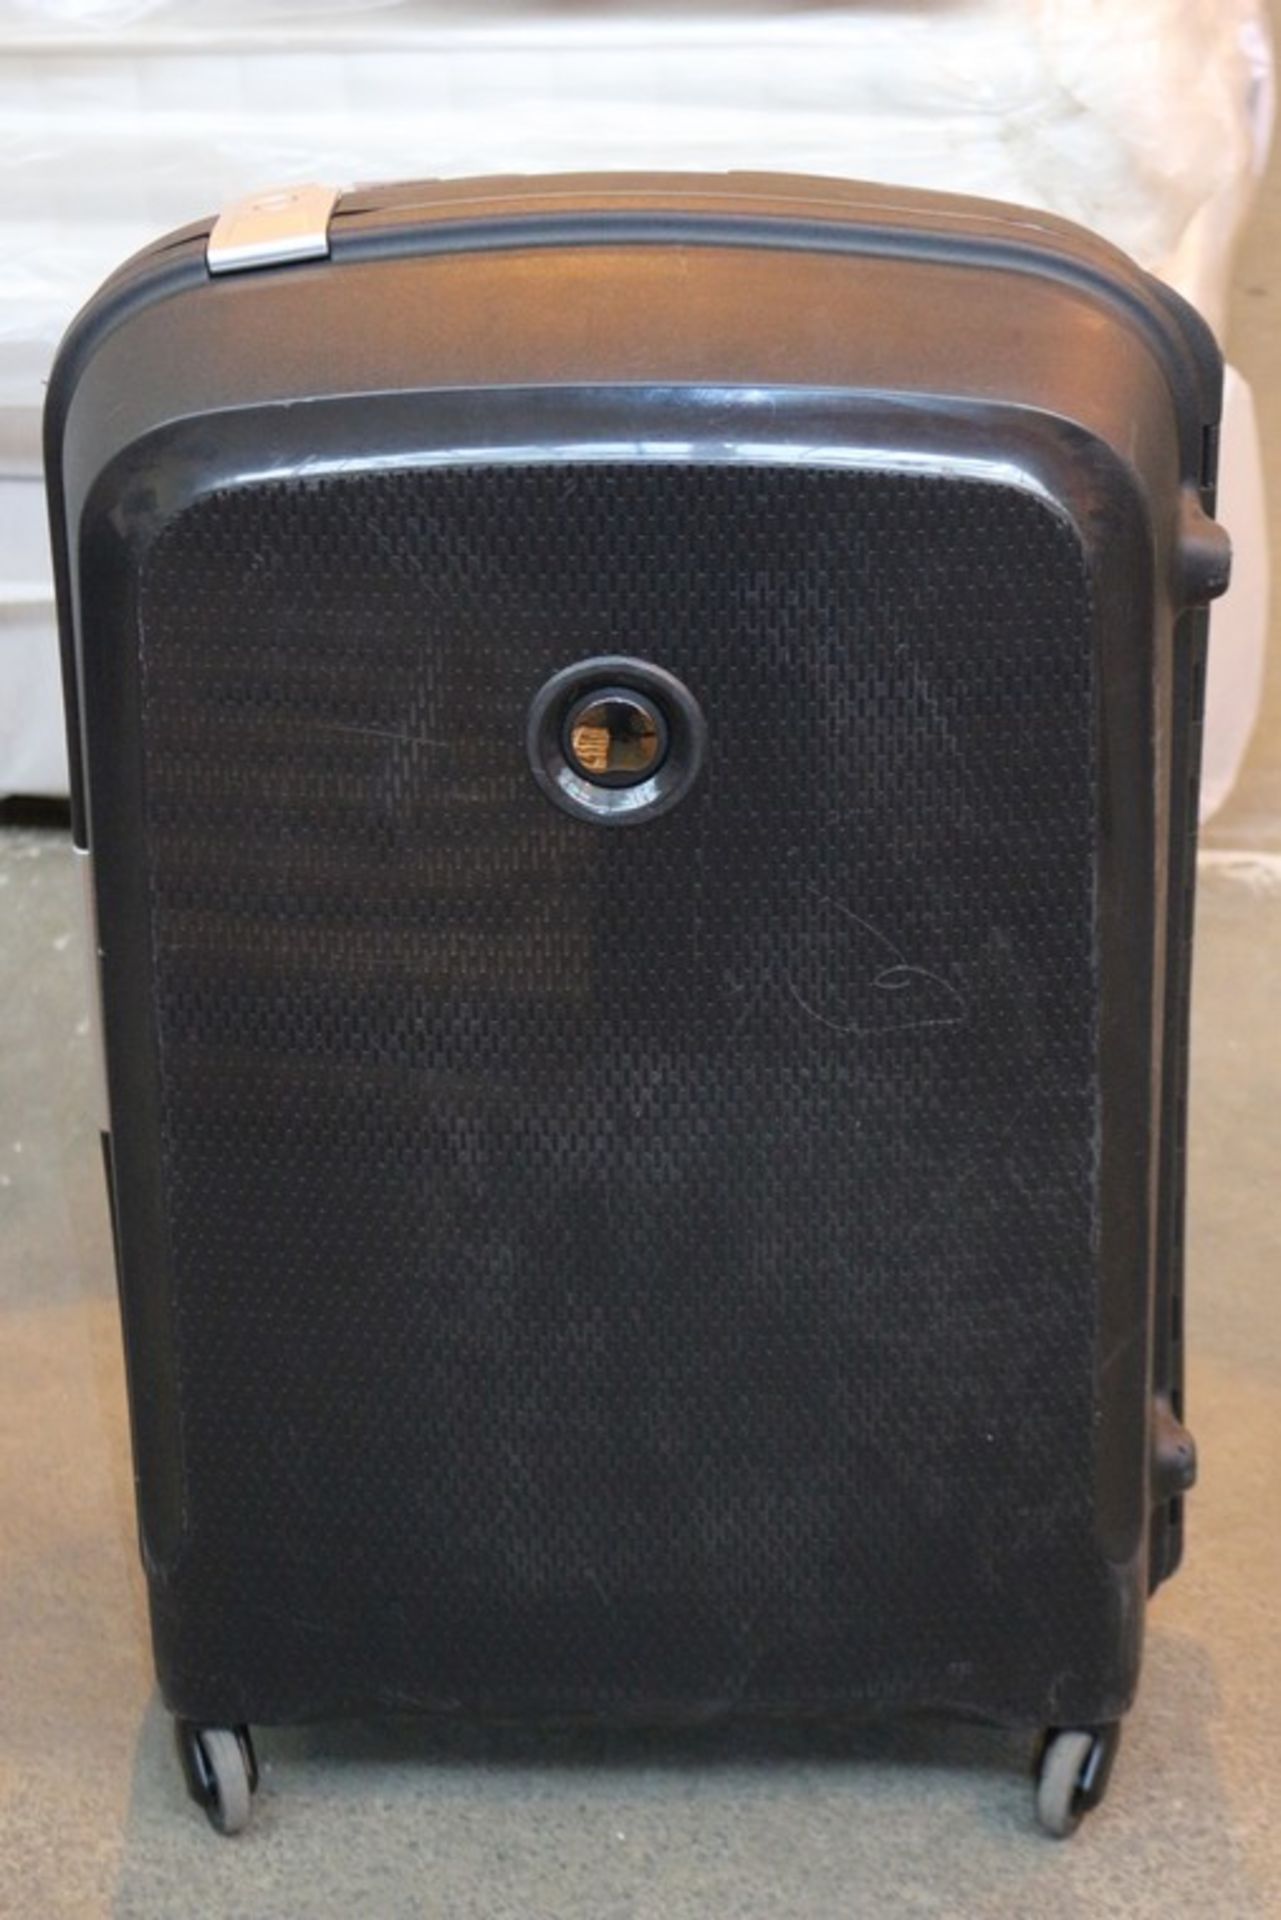 1 x DELSEY 4 WHEELED 360 DEGREE HARD SHELL TROLLEY LUGGAGE SUITCASE RRP £130 *PLEASE NOTE THAT THE